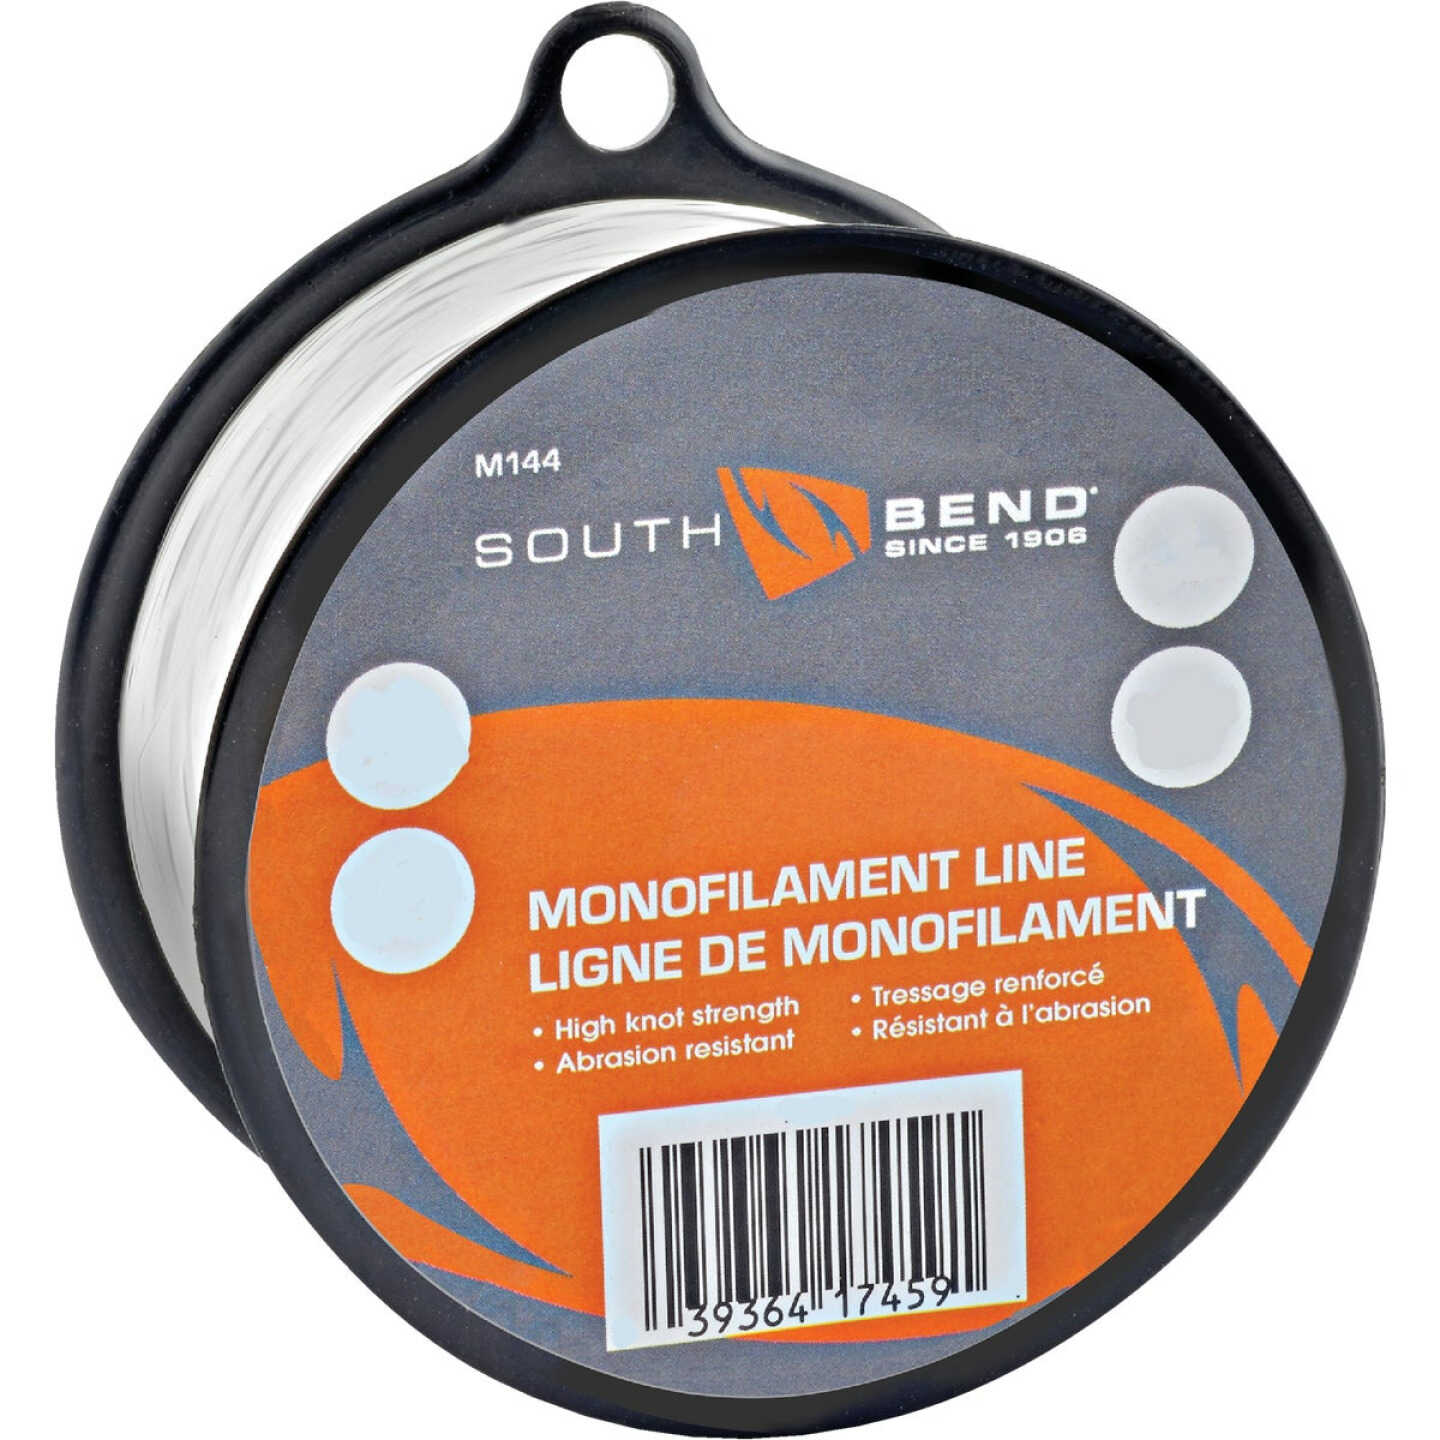 SouthBend 25 Lb. 220 Yd. Clear Monofilament Fishing Line - Close's